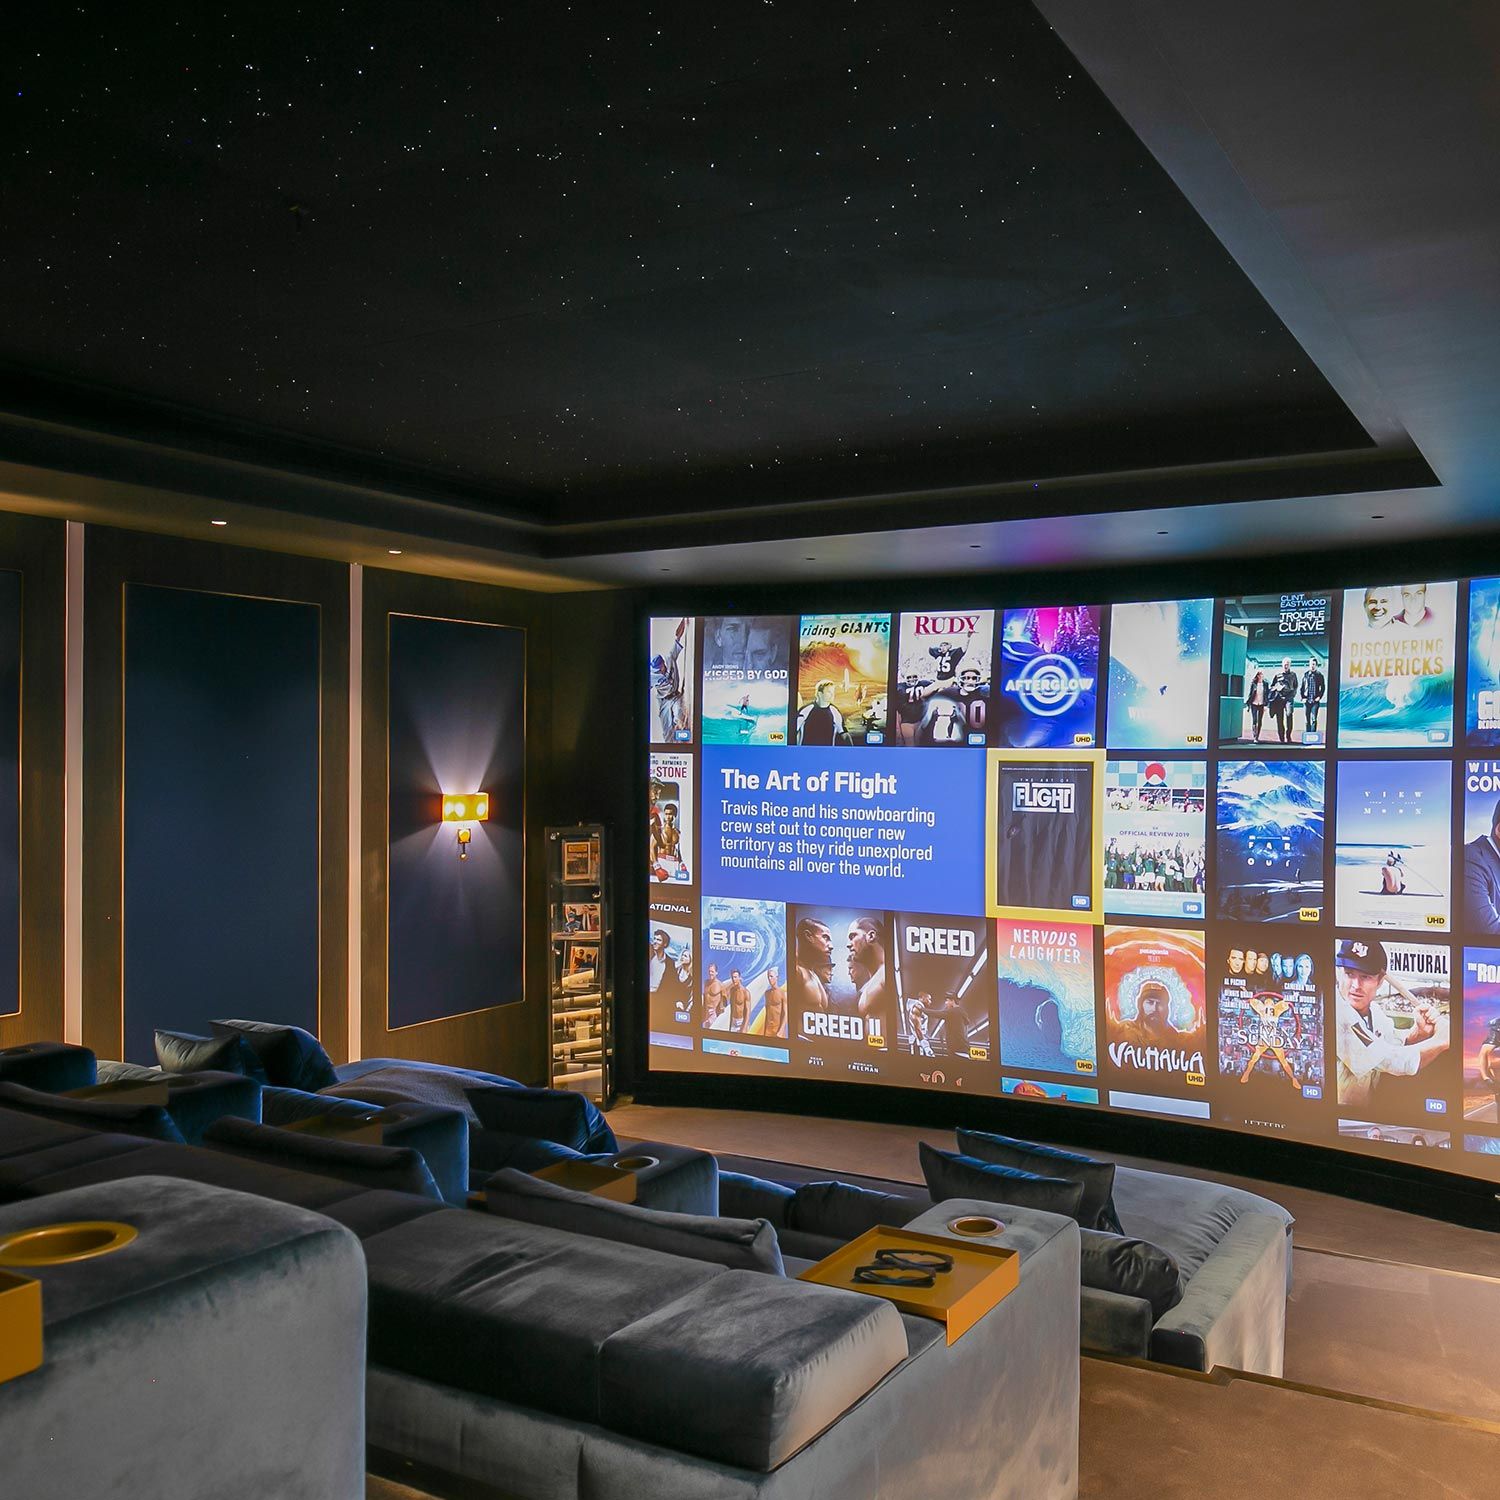 Luxury Home Cinema & Theater Systems Design and Installation